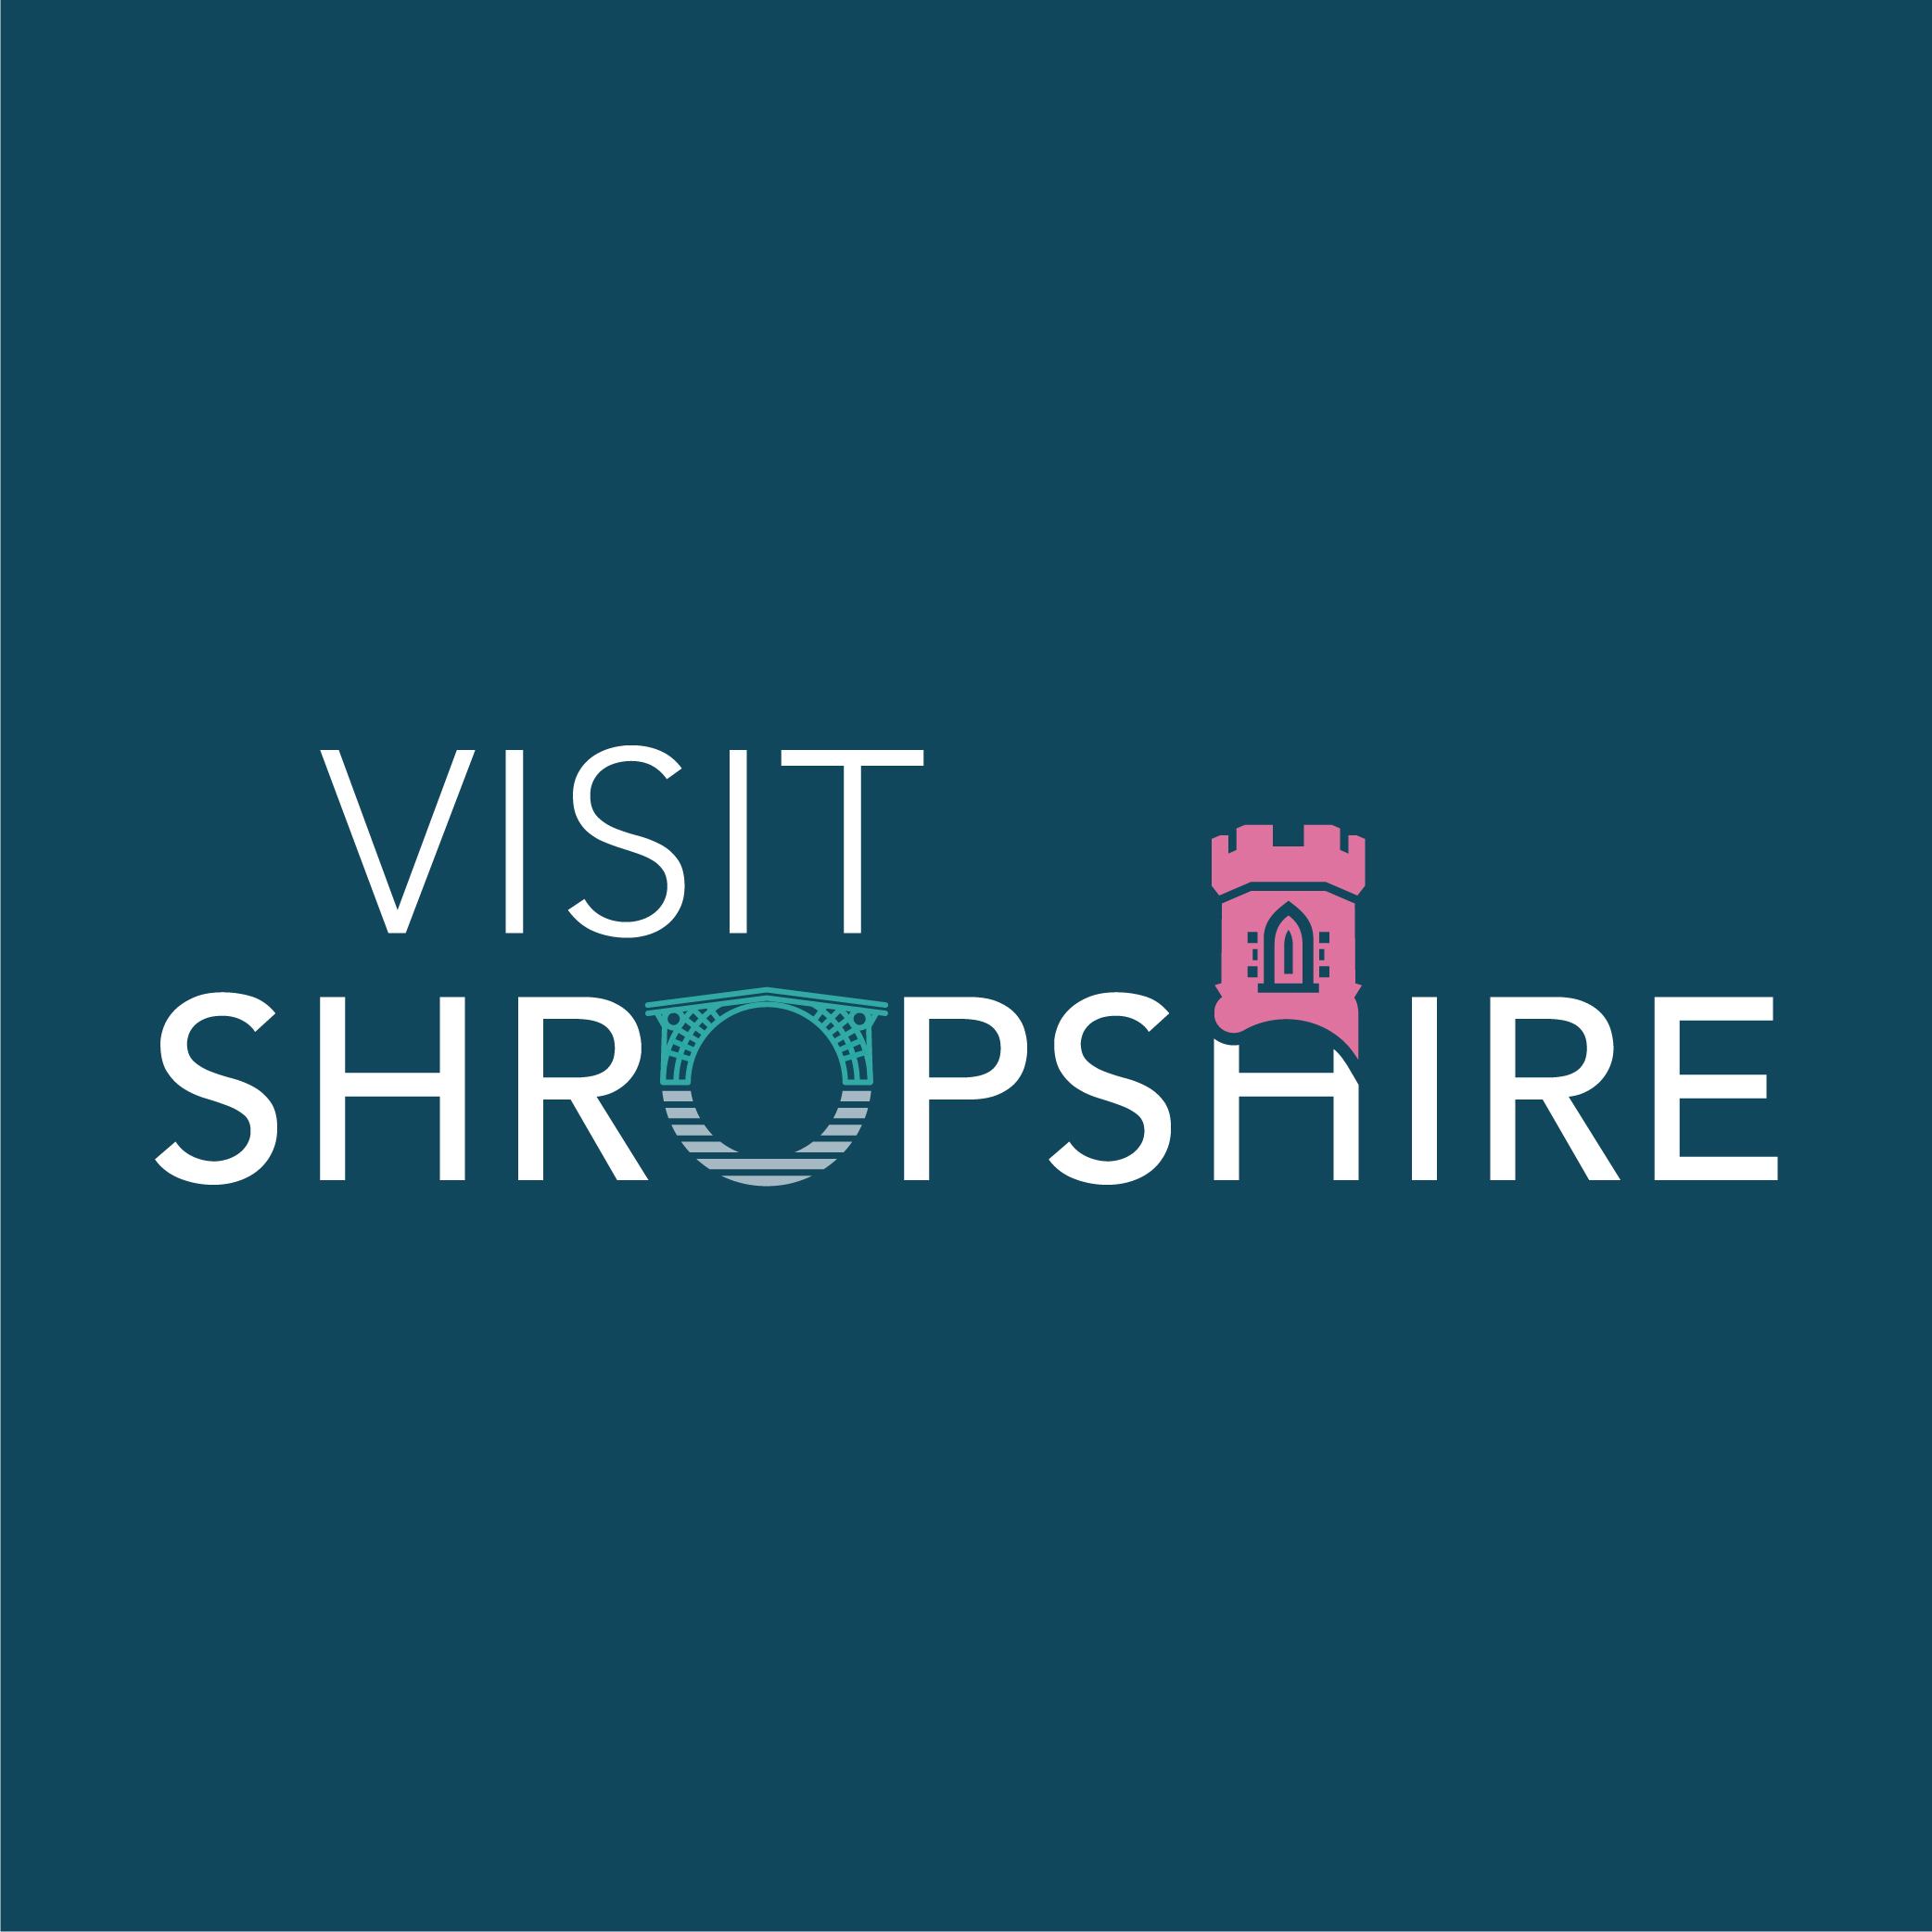 Reech proud to launch new Visit Shropshire brand